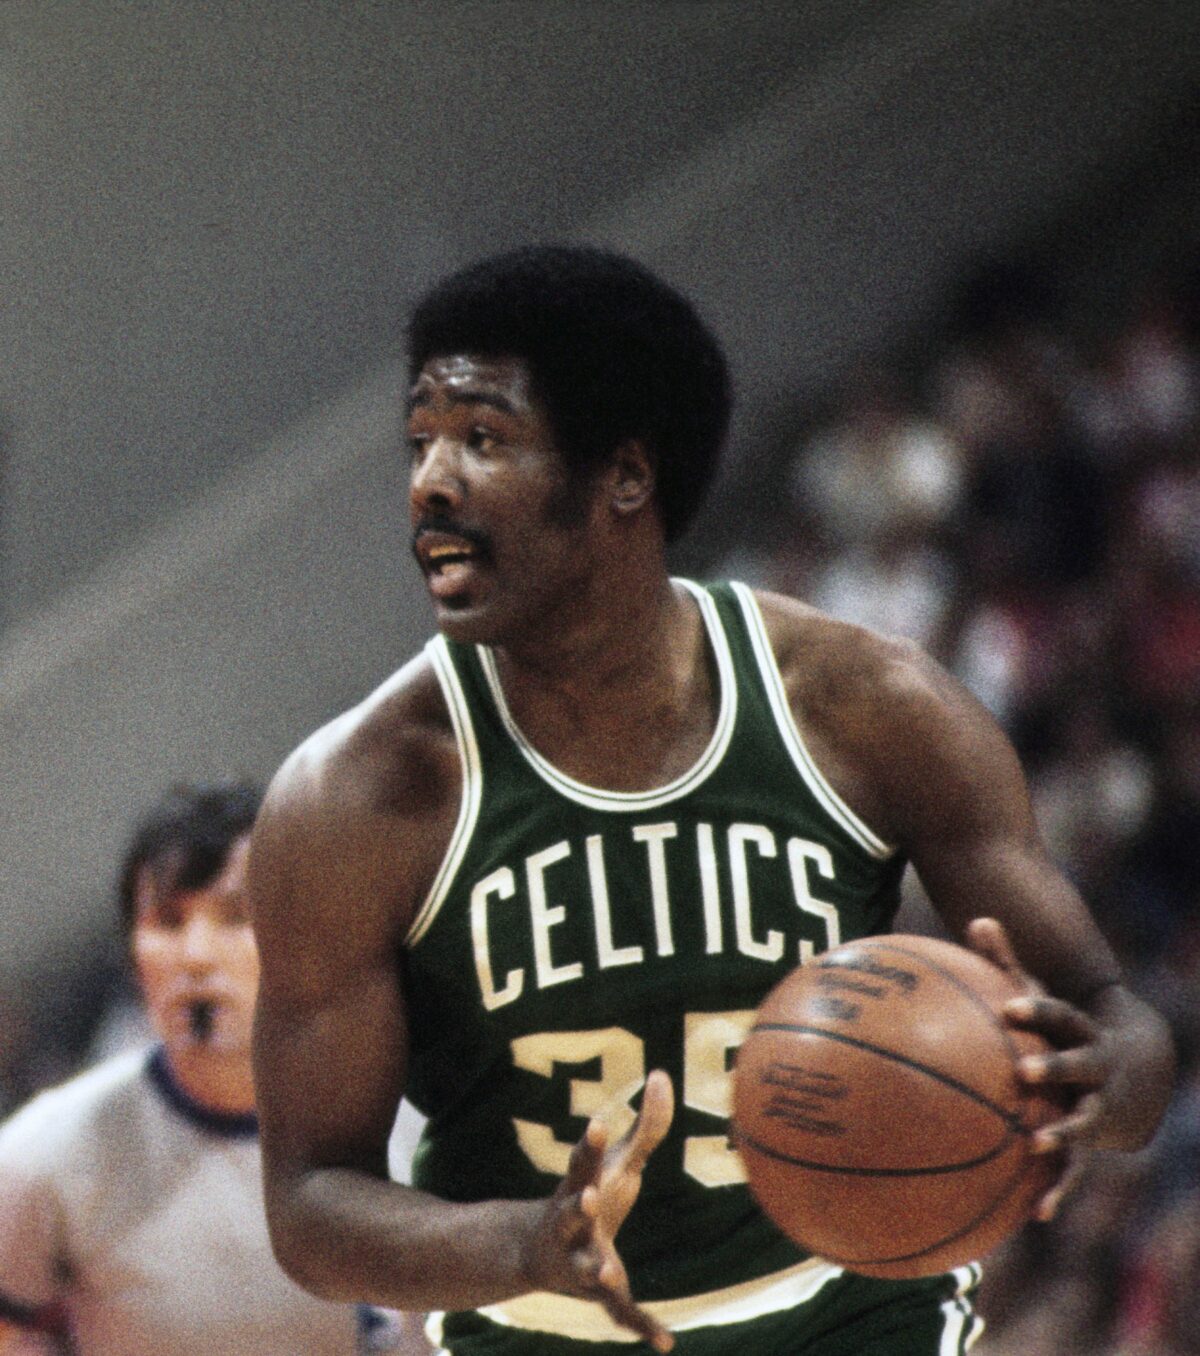 Celtics champion Paul Silas was a key part of Boston’s 1976 title … by being ignored